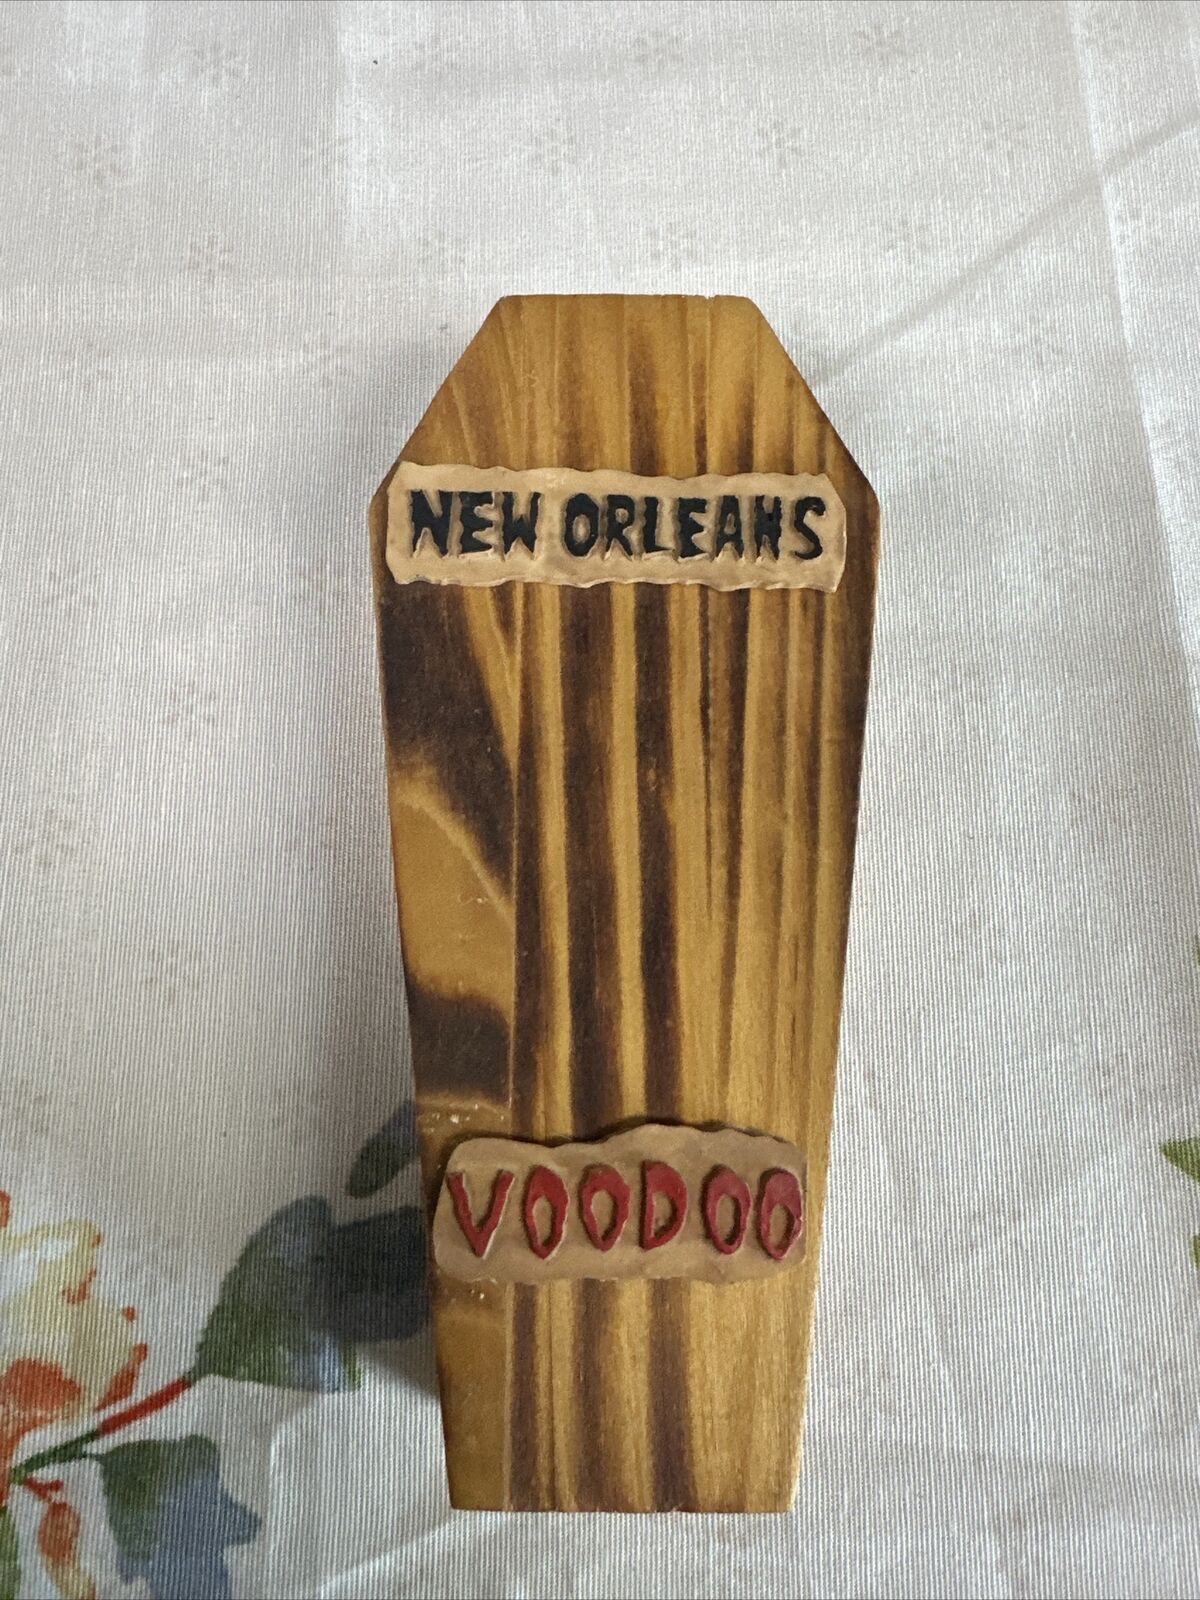 Voodoo Doll in Wooden Coffin New Orleans Souvenir Mardi Gras 7 Pins P & A Gift